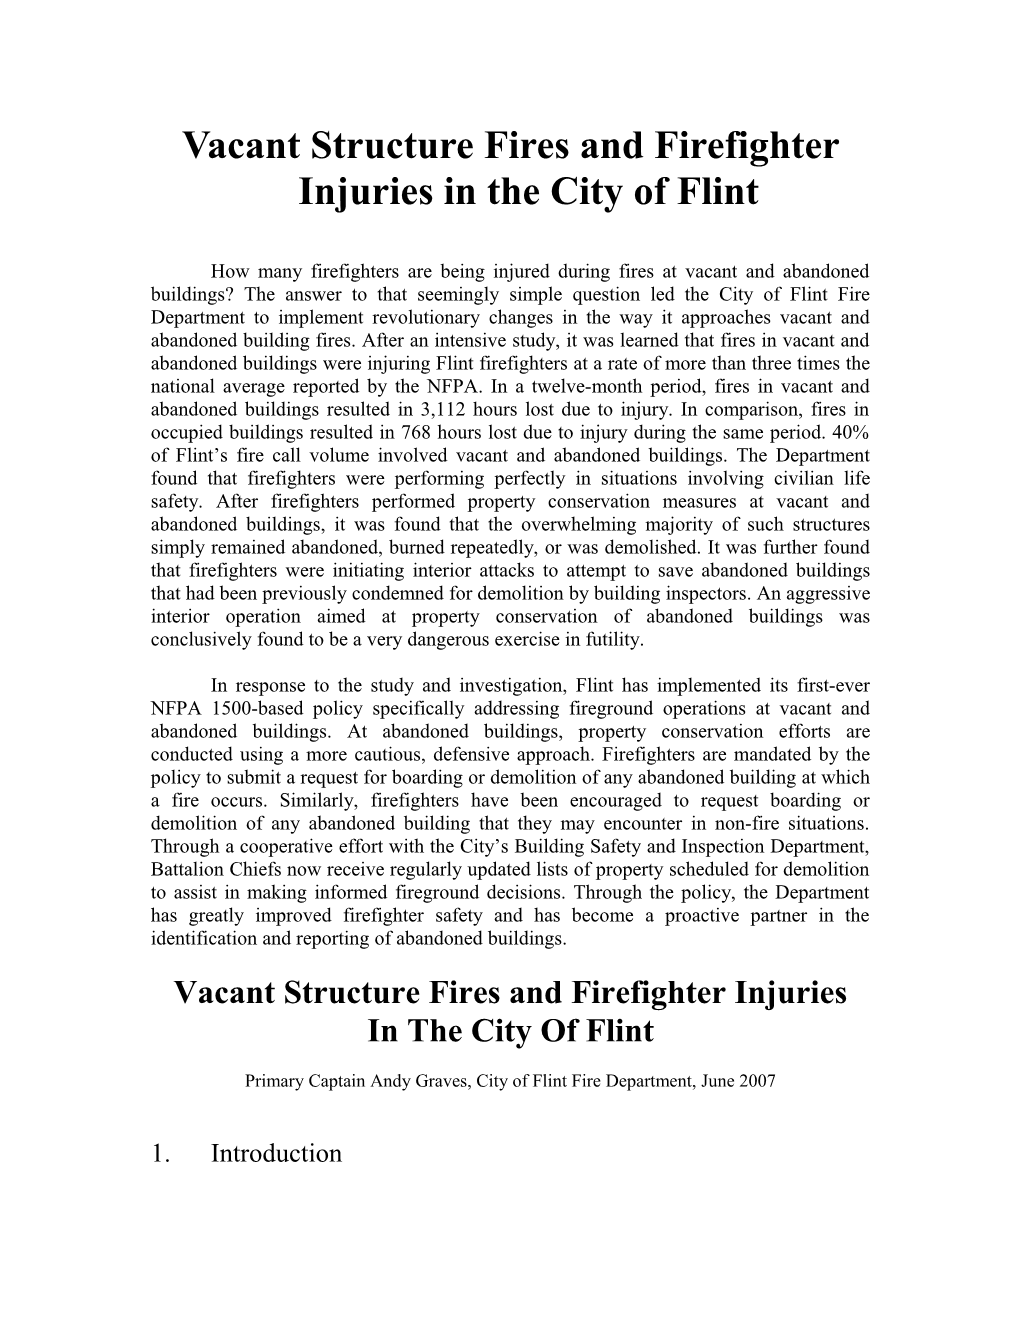 Vacant Structure Fires and Firefighter Injuries in the City of Flint